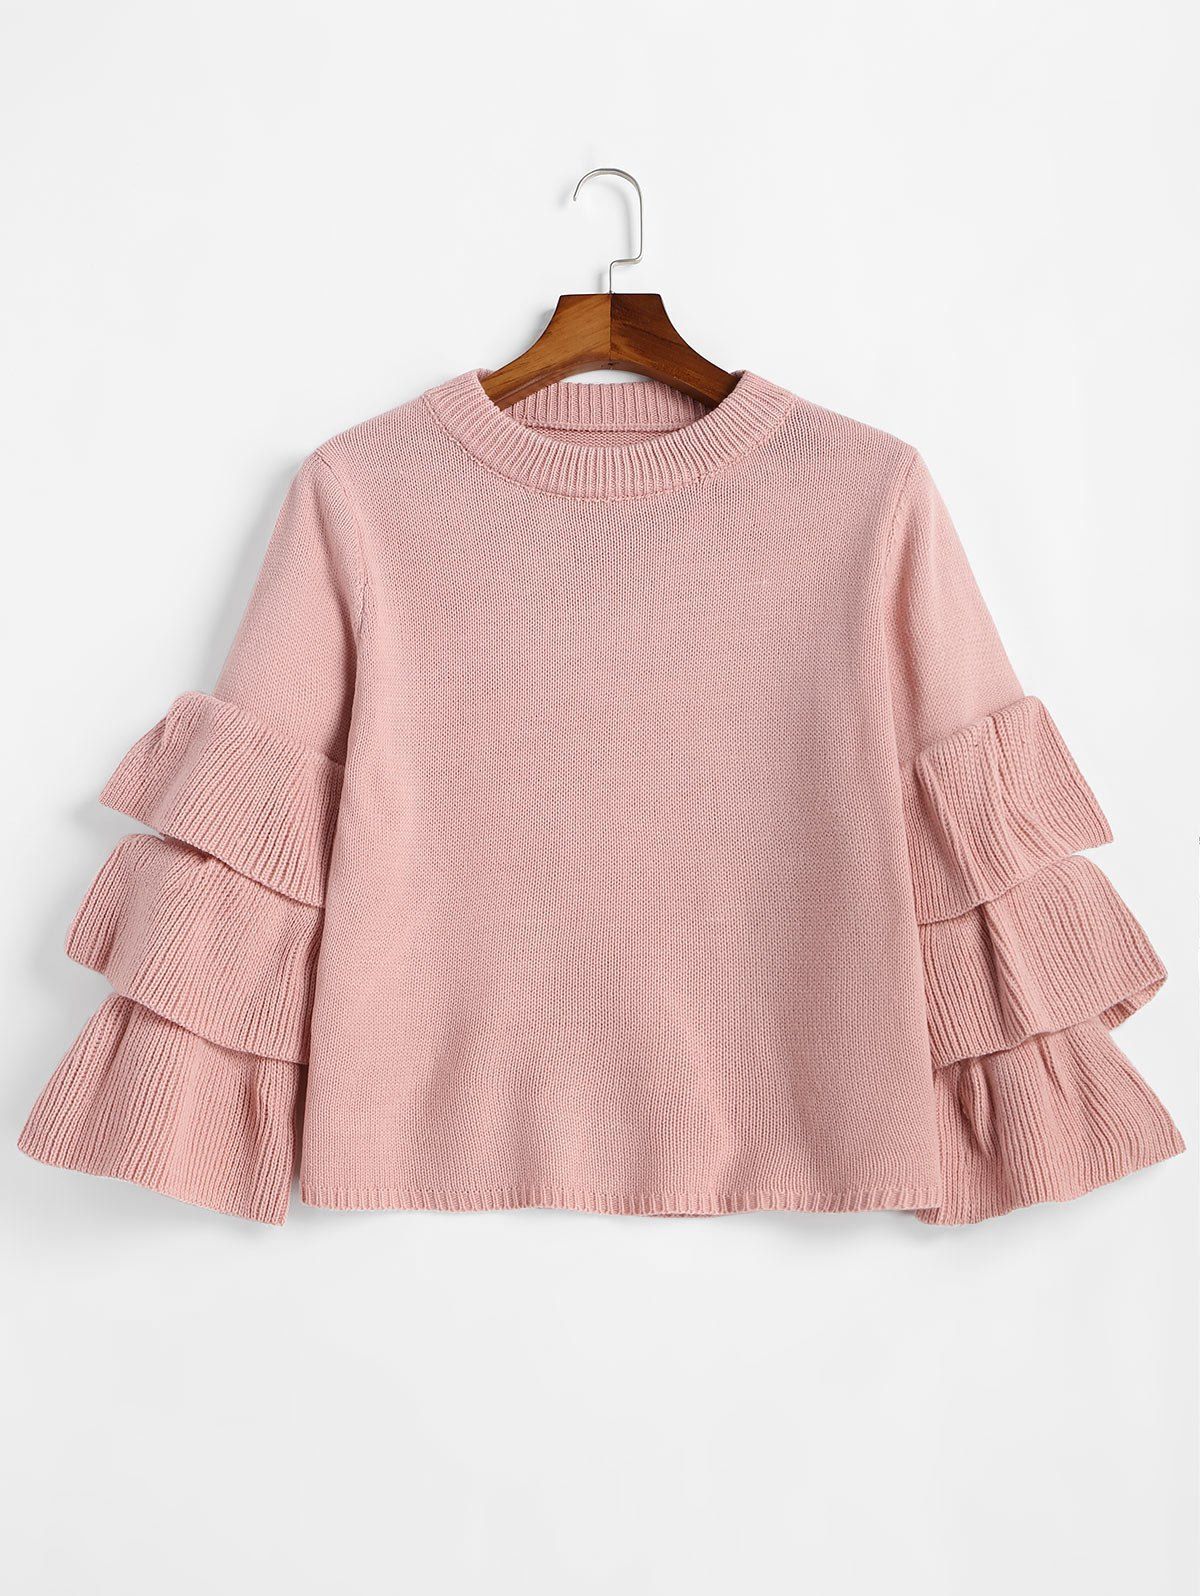 Layered Sleeve Flouncy Pullover Sweater - PINK ONE SIZE